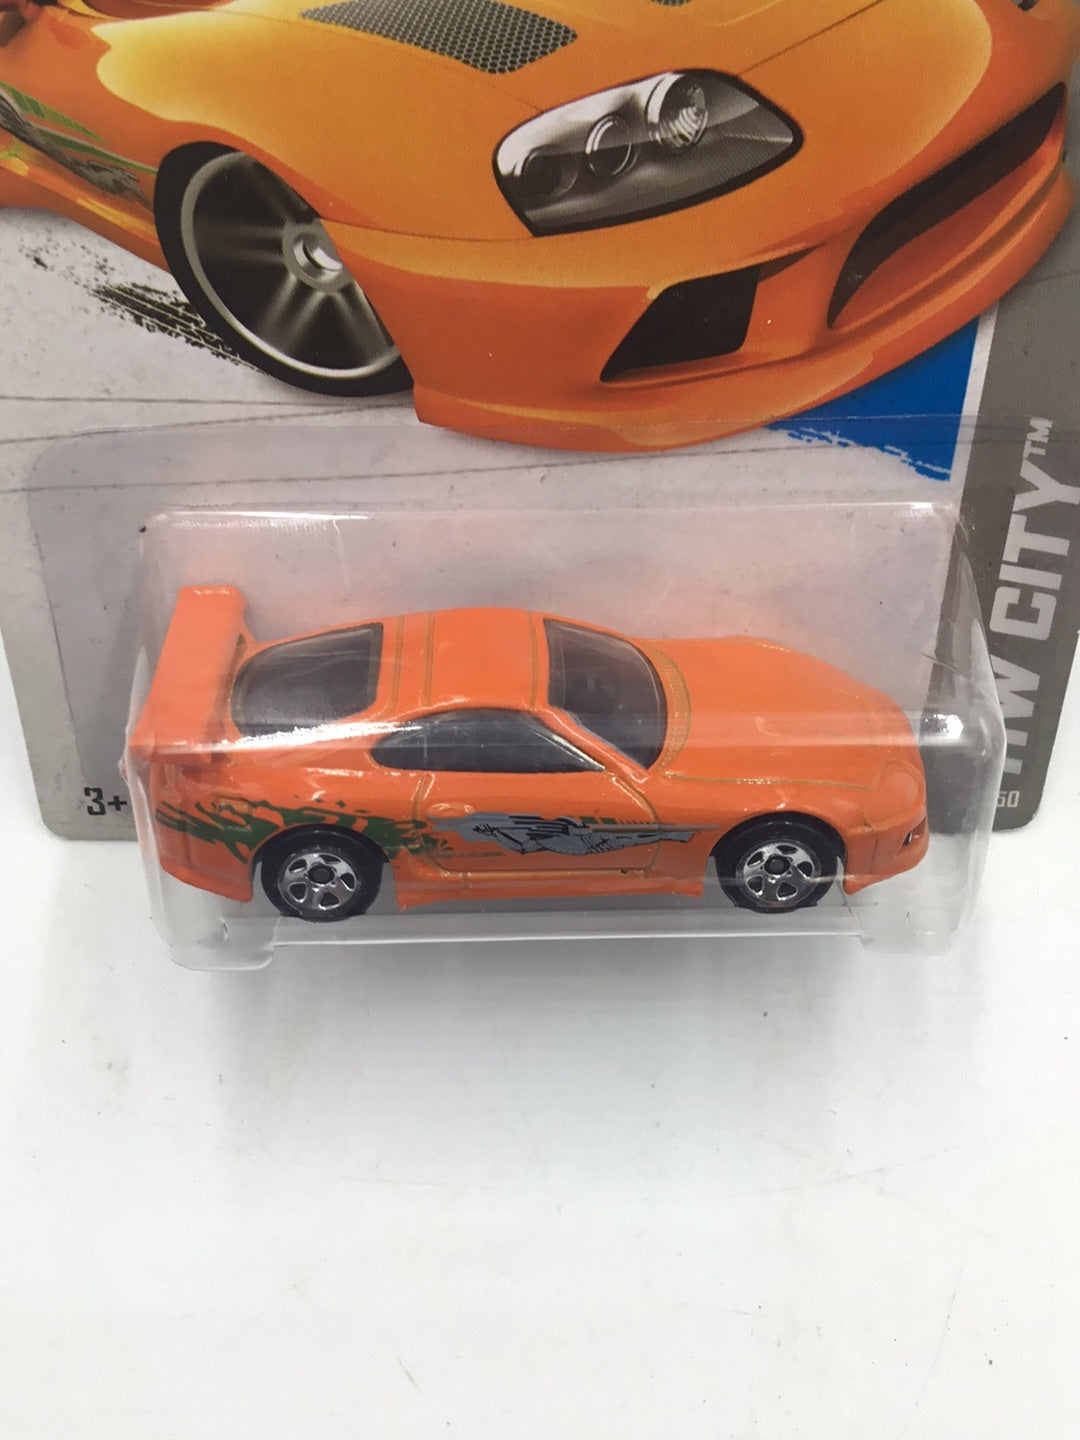 2013 Hot wheels fast and furious #5 Toyota Supra with protector